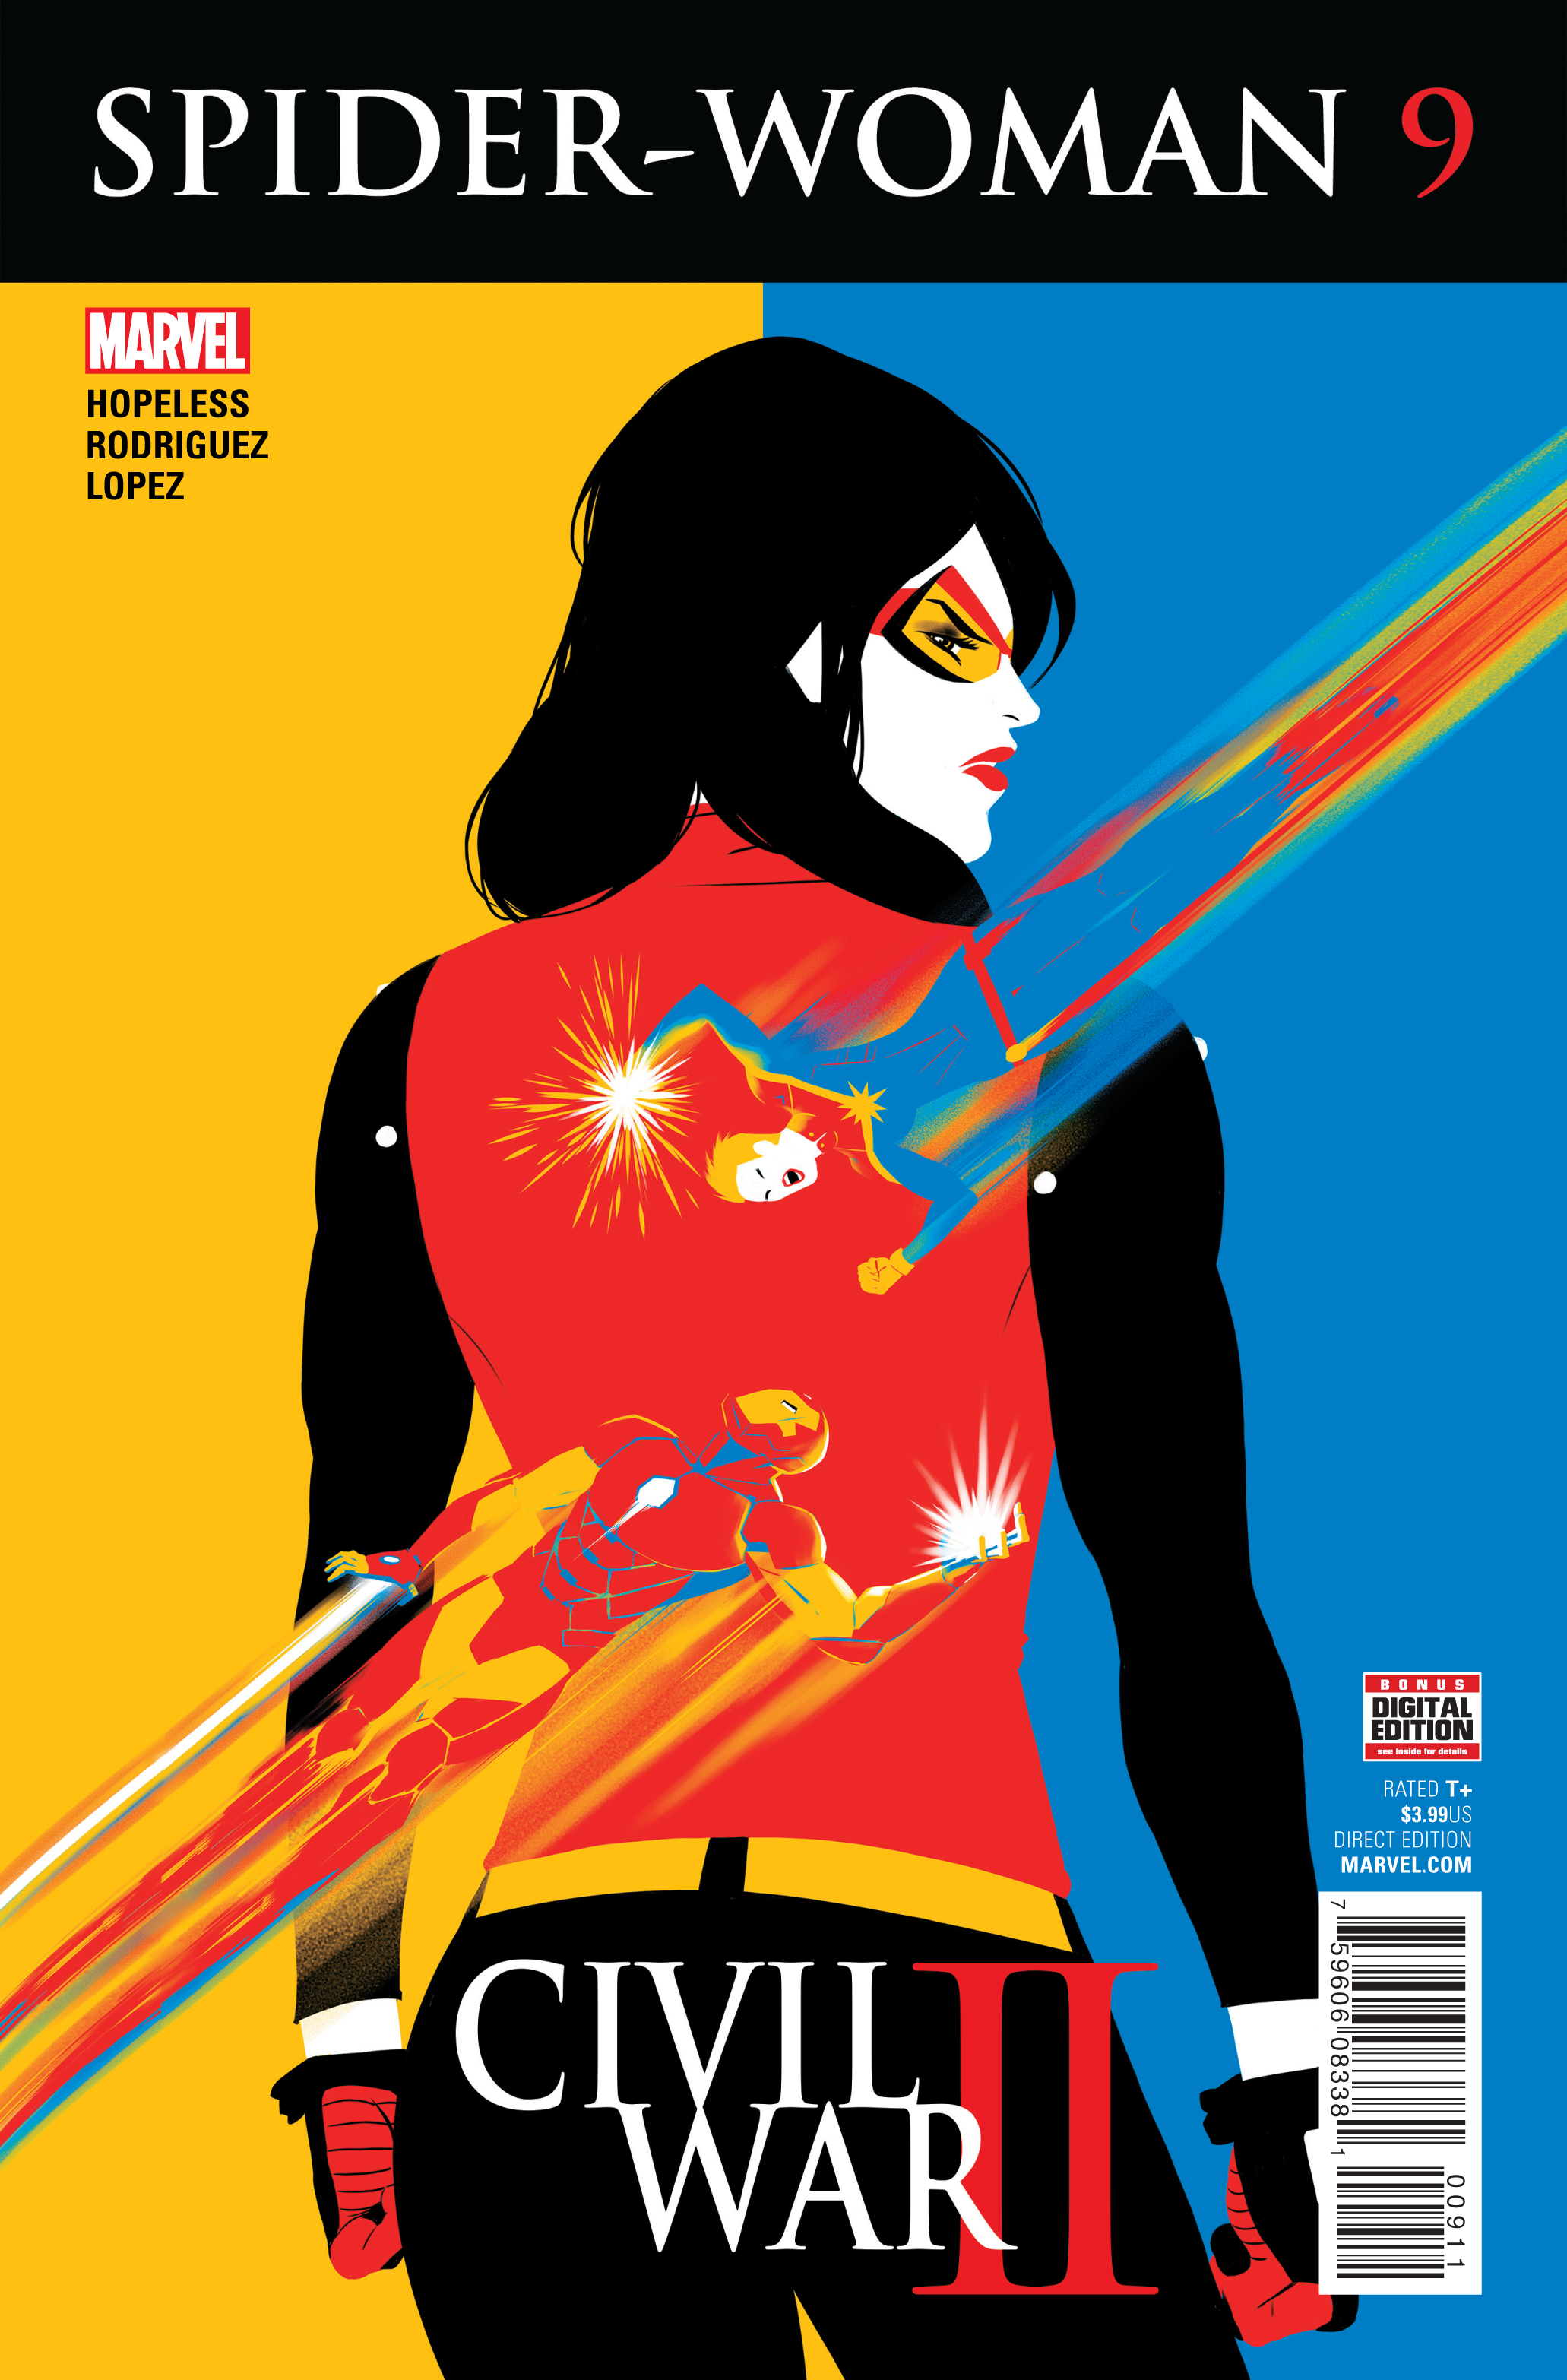 SPIDER-WOMAN #9 CW2